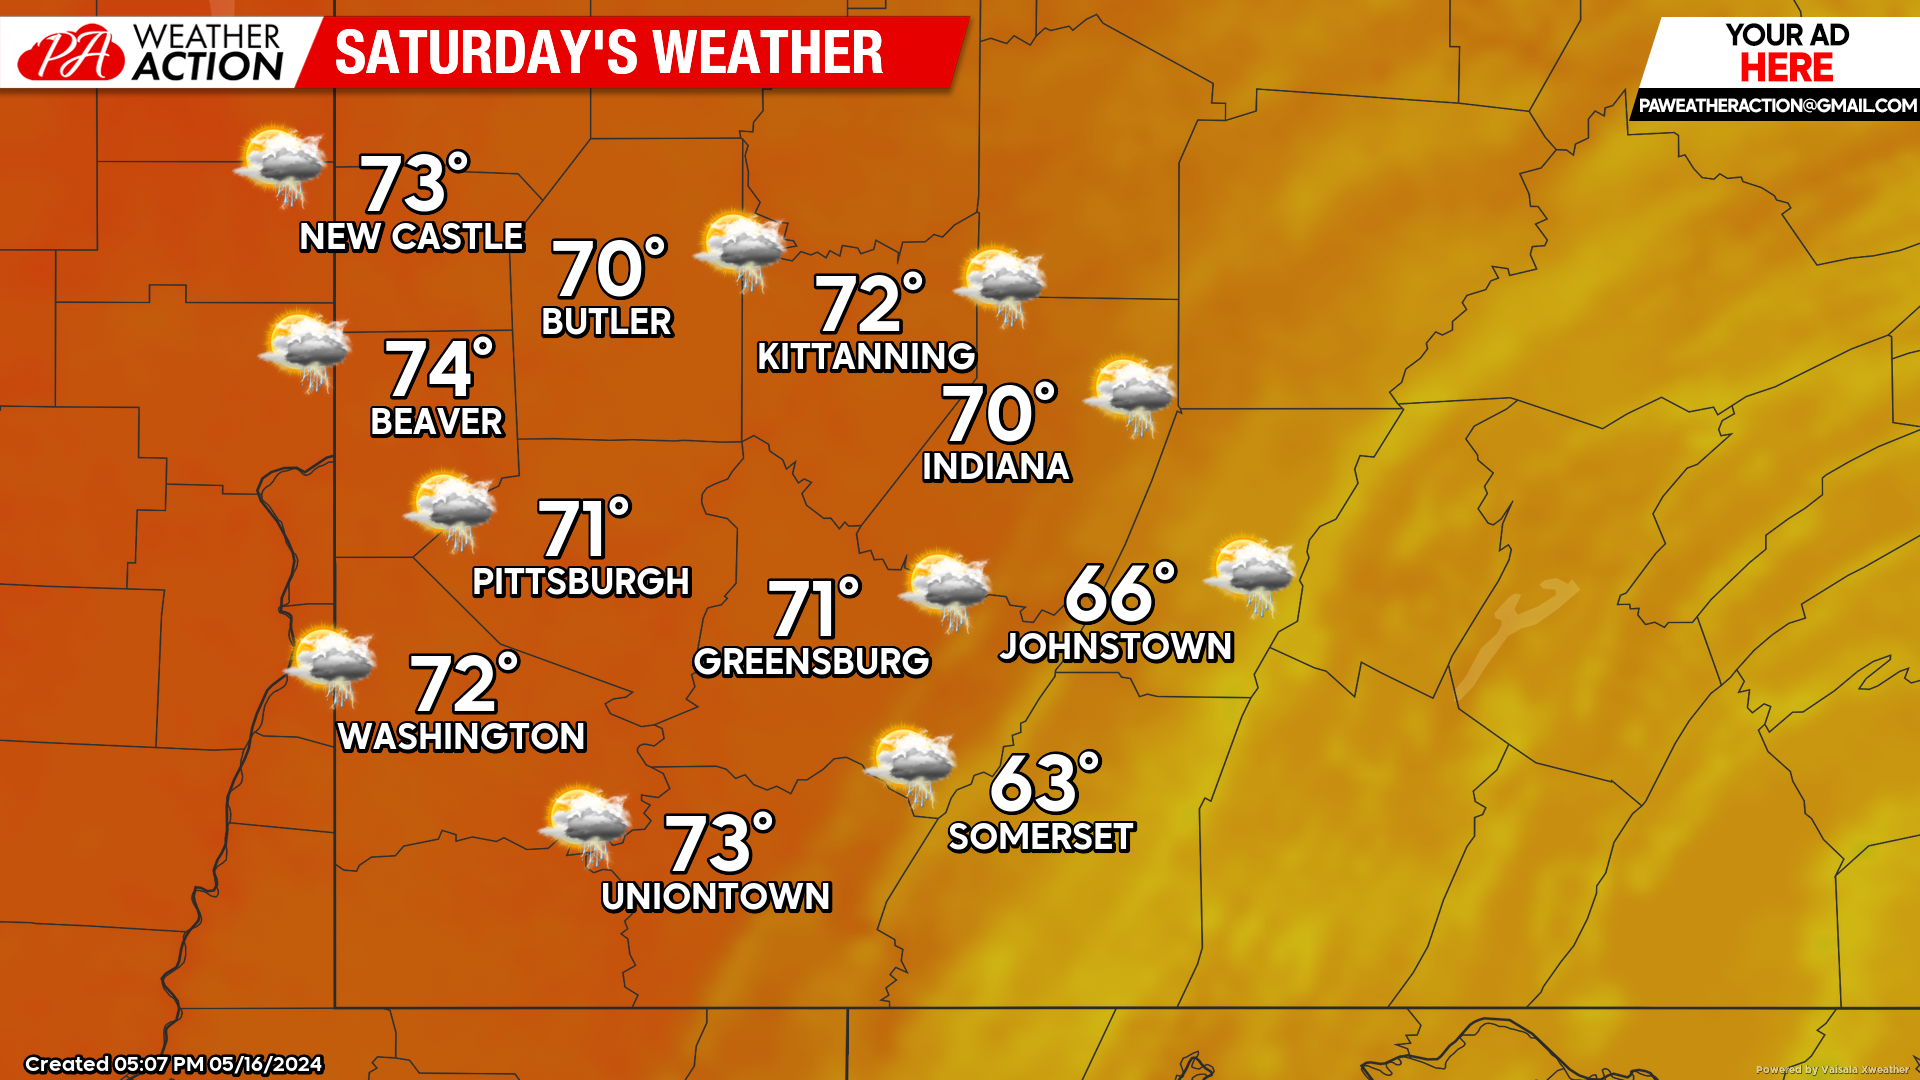 Isolated Chances for Showers and Thunderstorms This Weekend